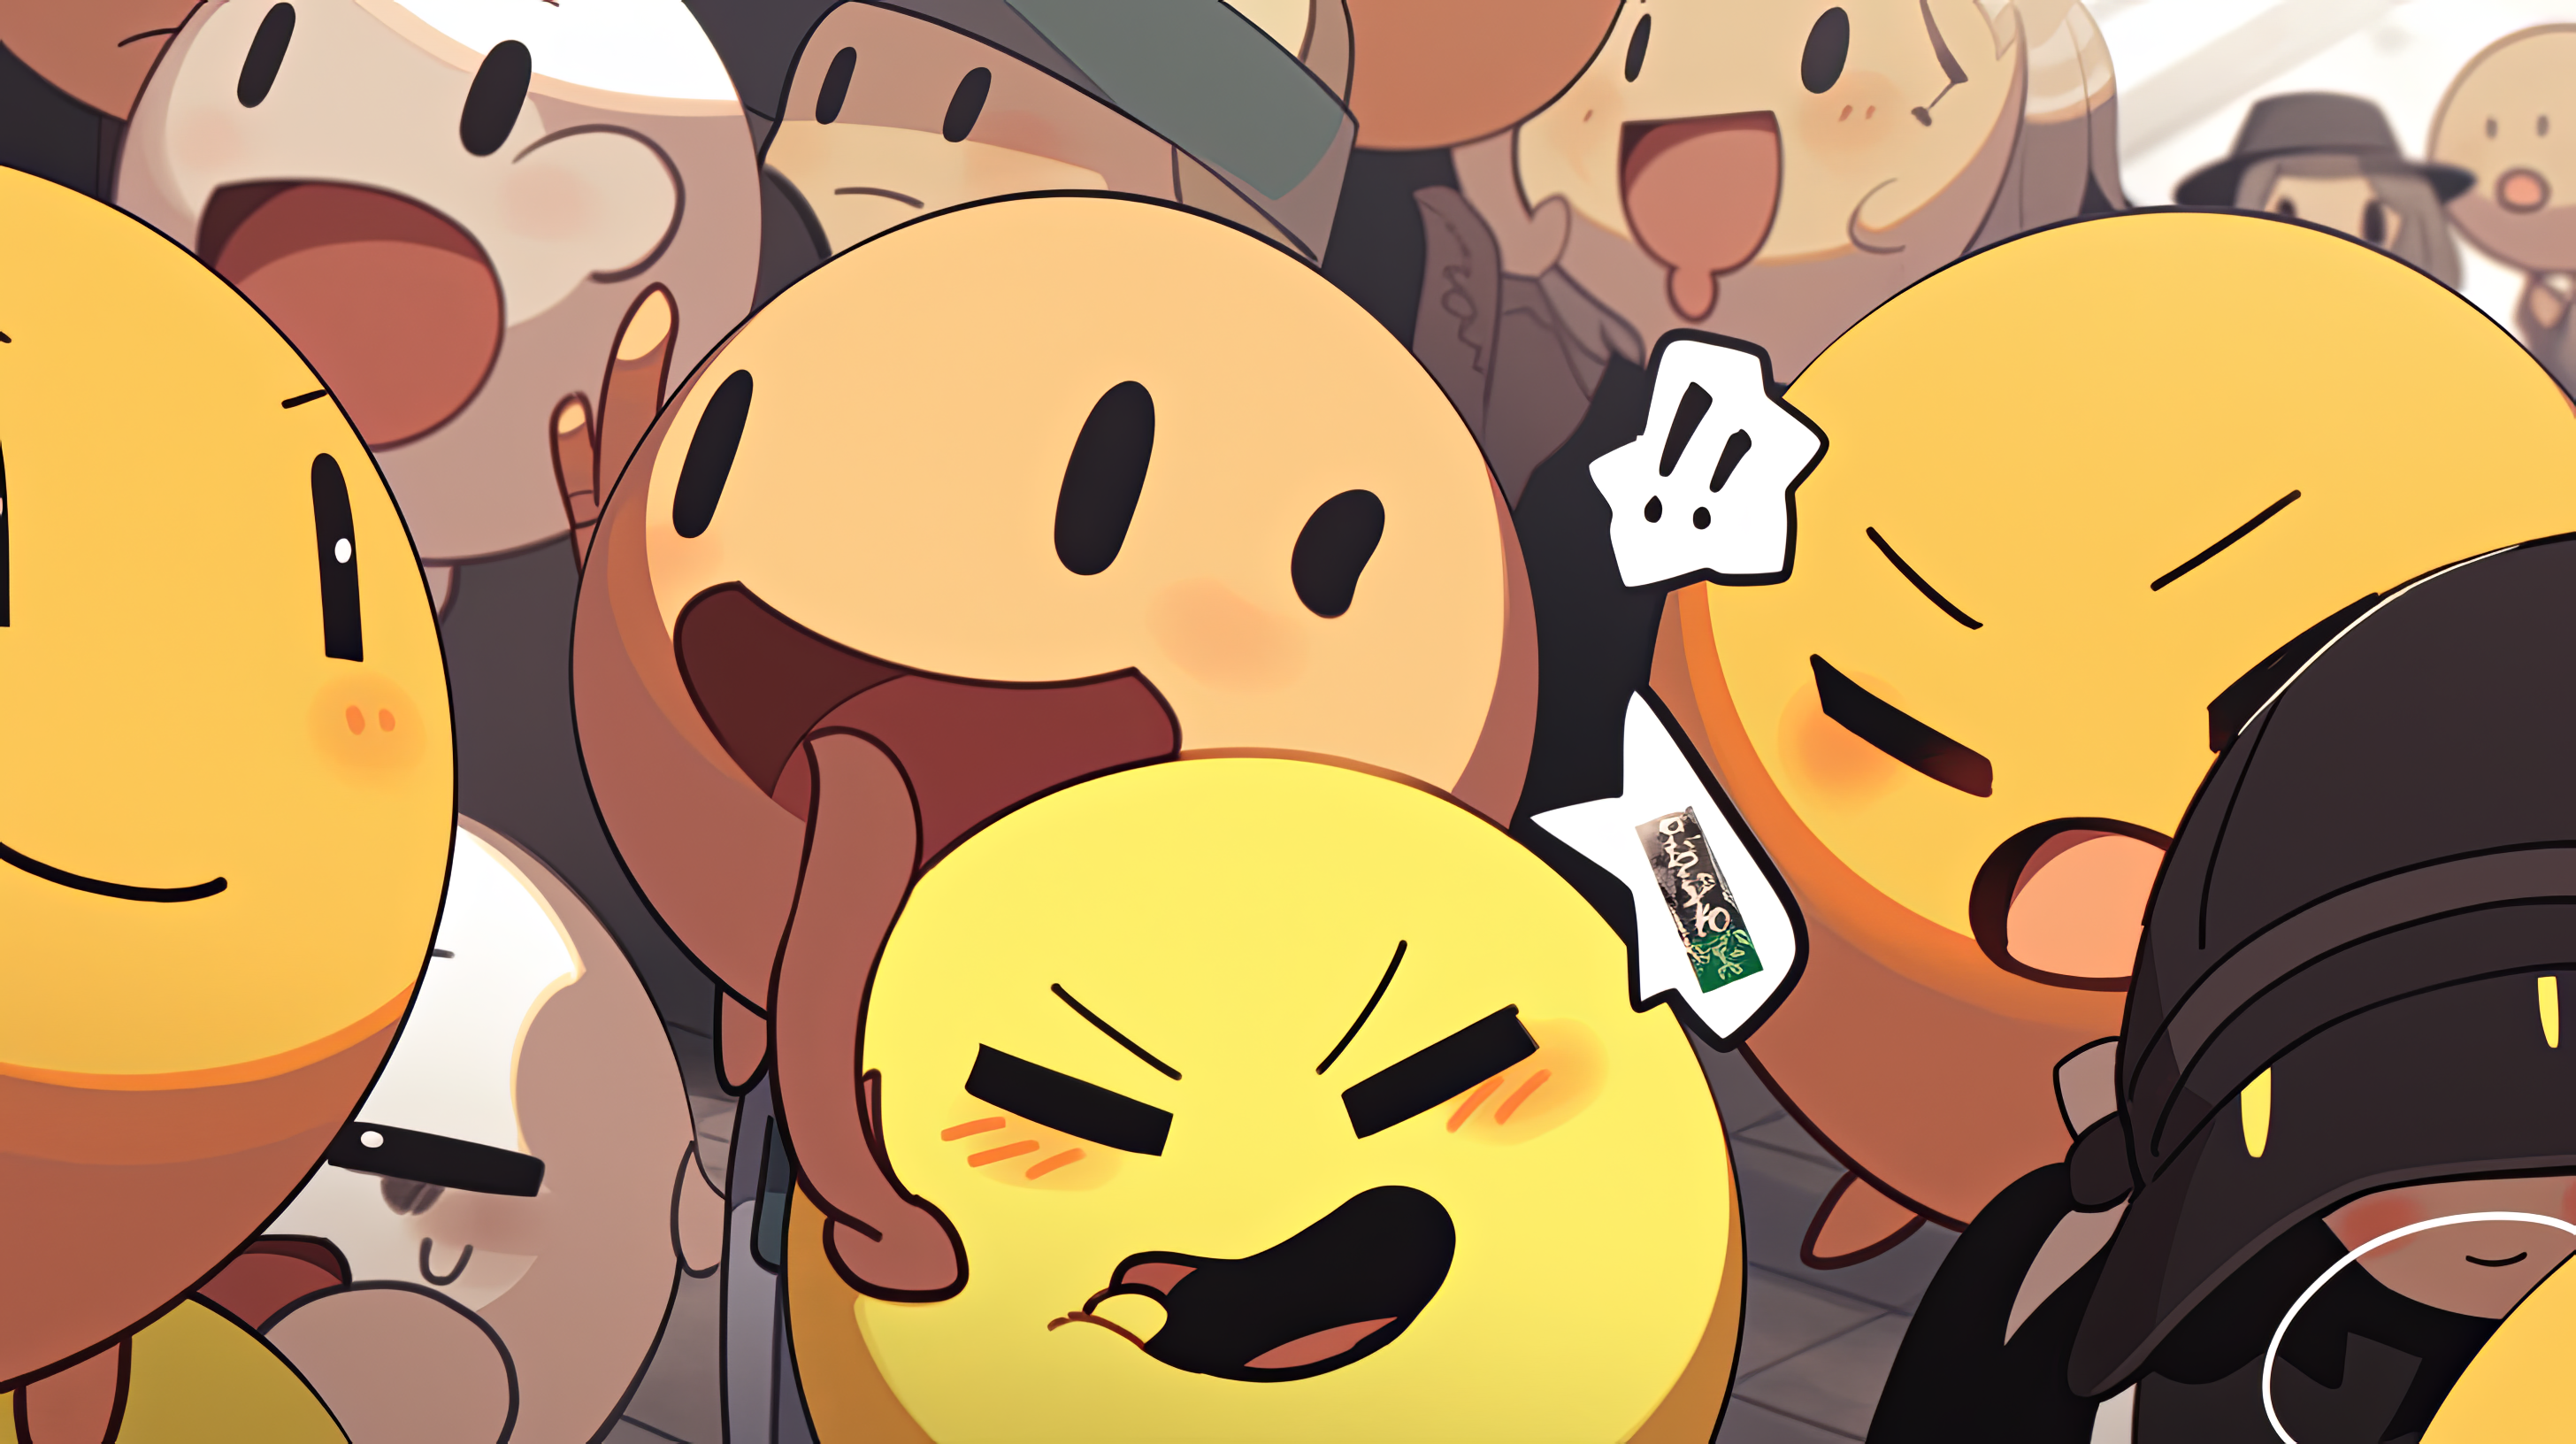 HD desktop wallpaper featuring a collection of stylized emoji characters in various expressions, created with AI art, perfect for a fun and expressive background.